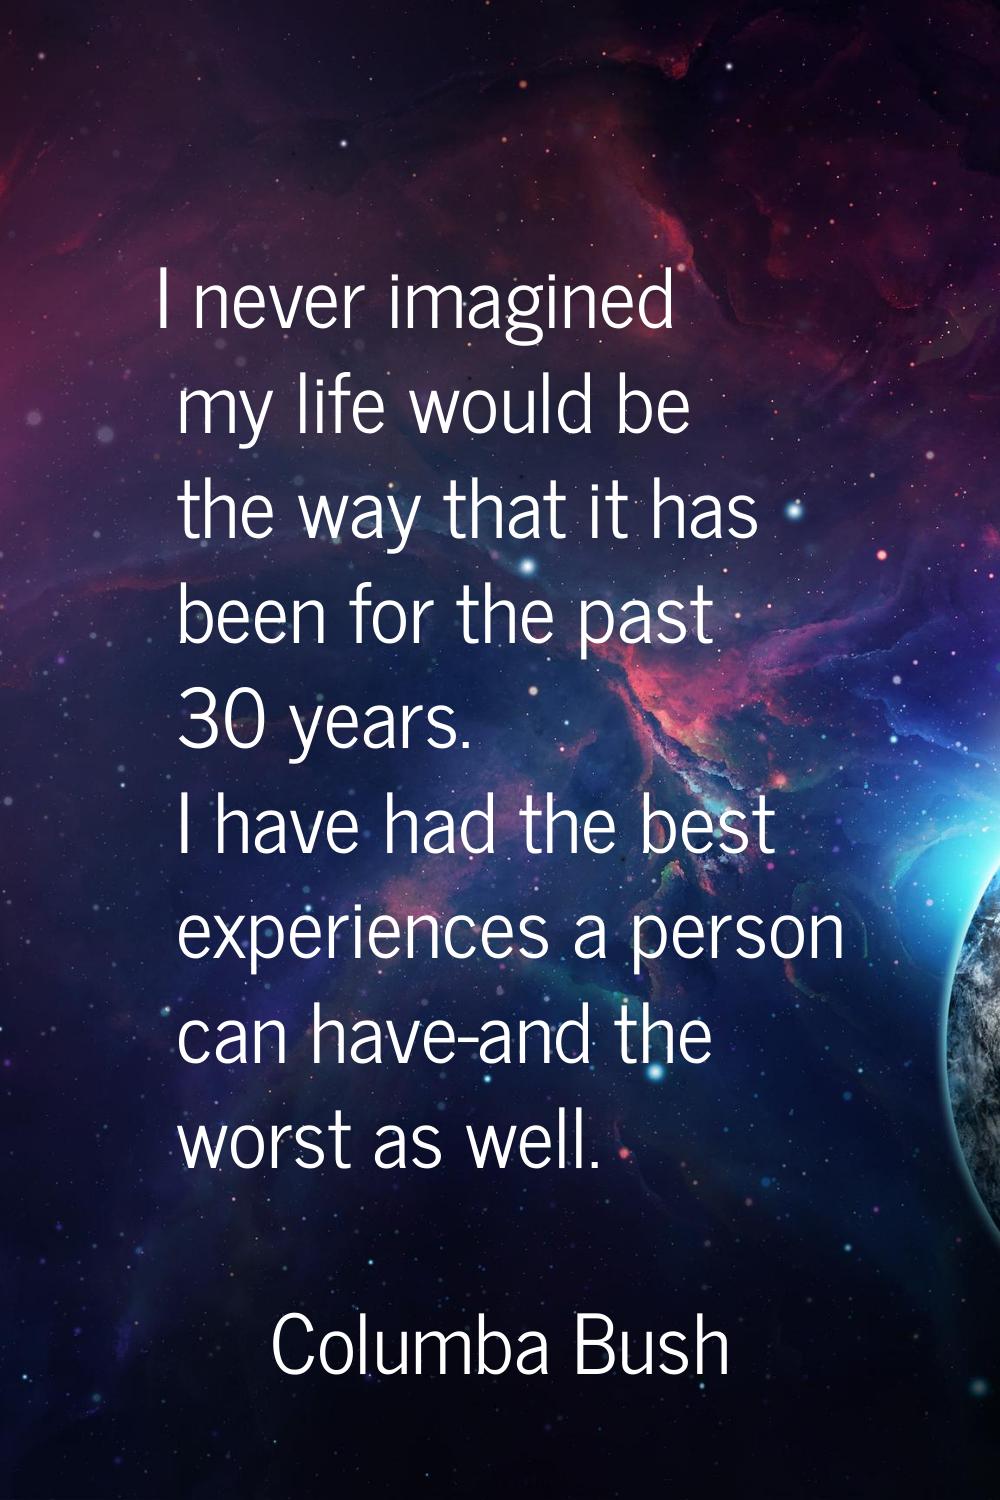 I never imagined my life would be the way that it has been for the past 30 years. I have had the be